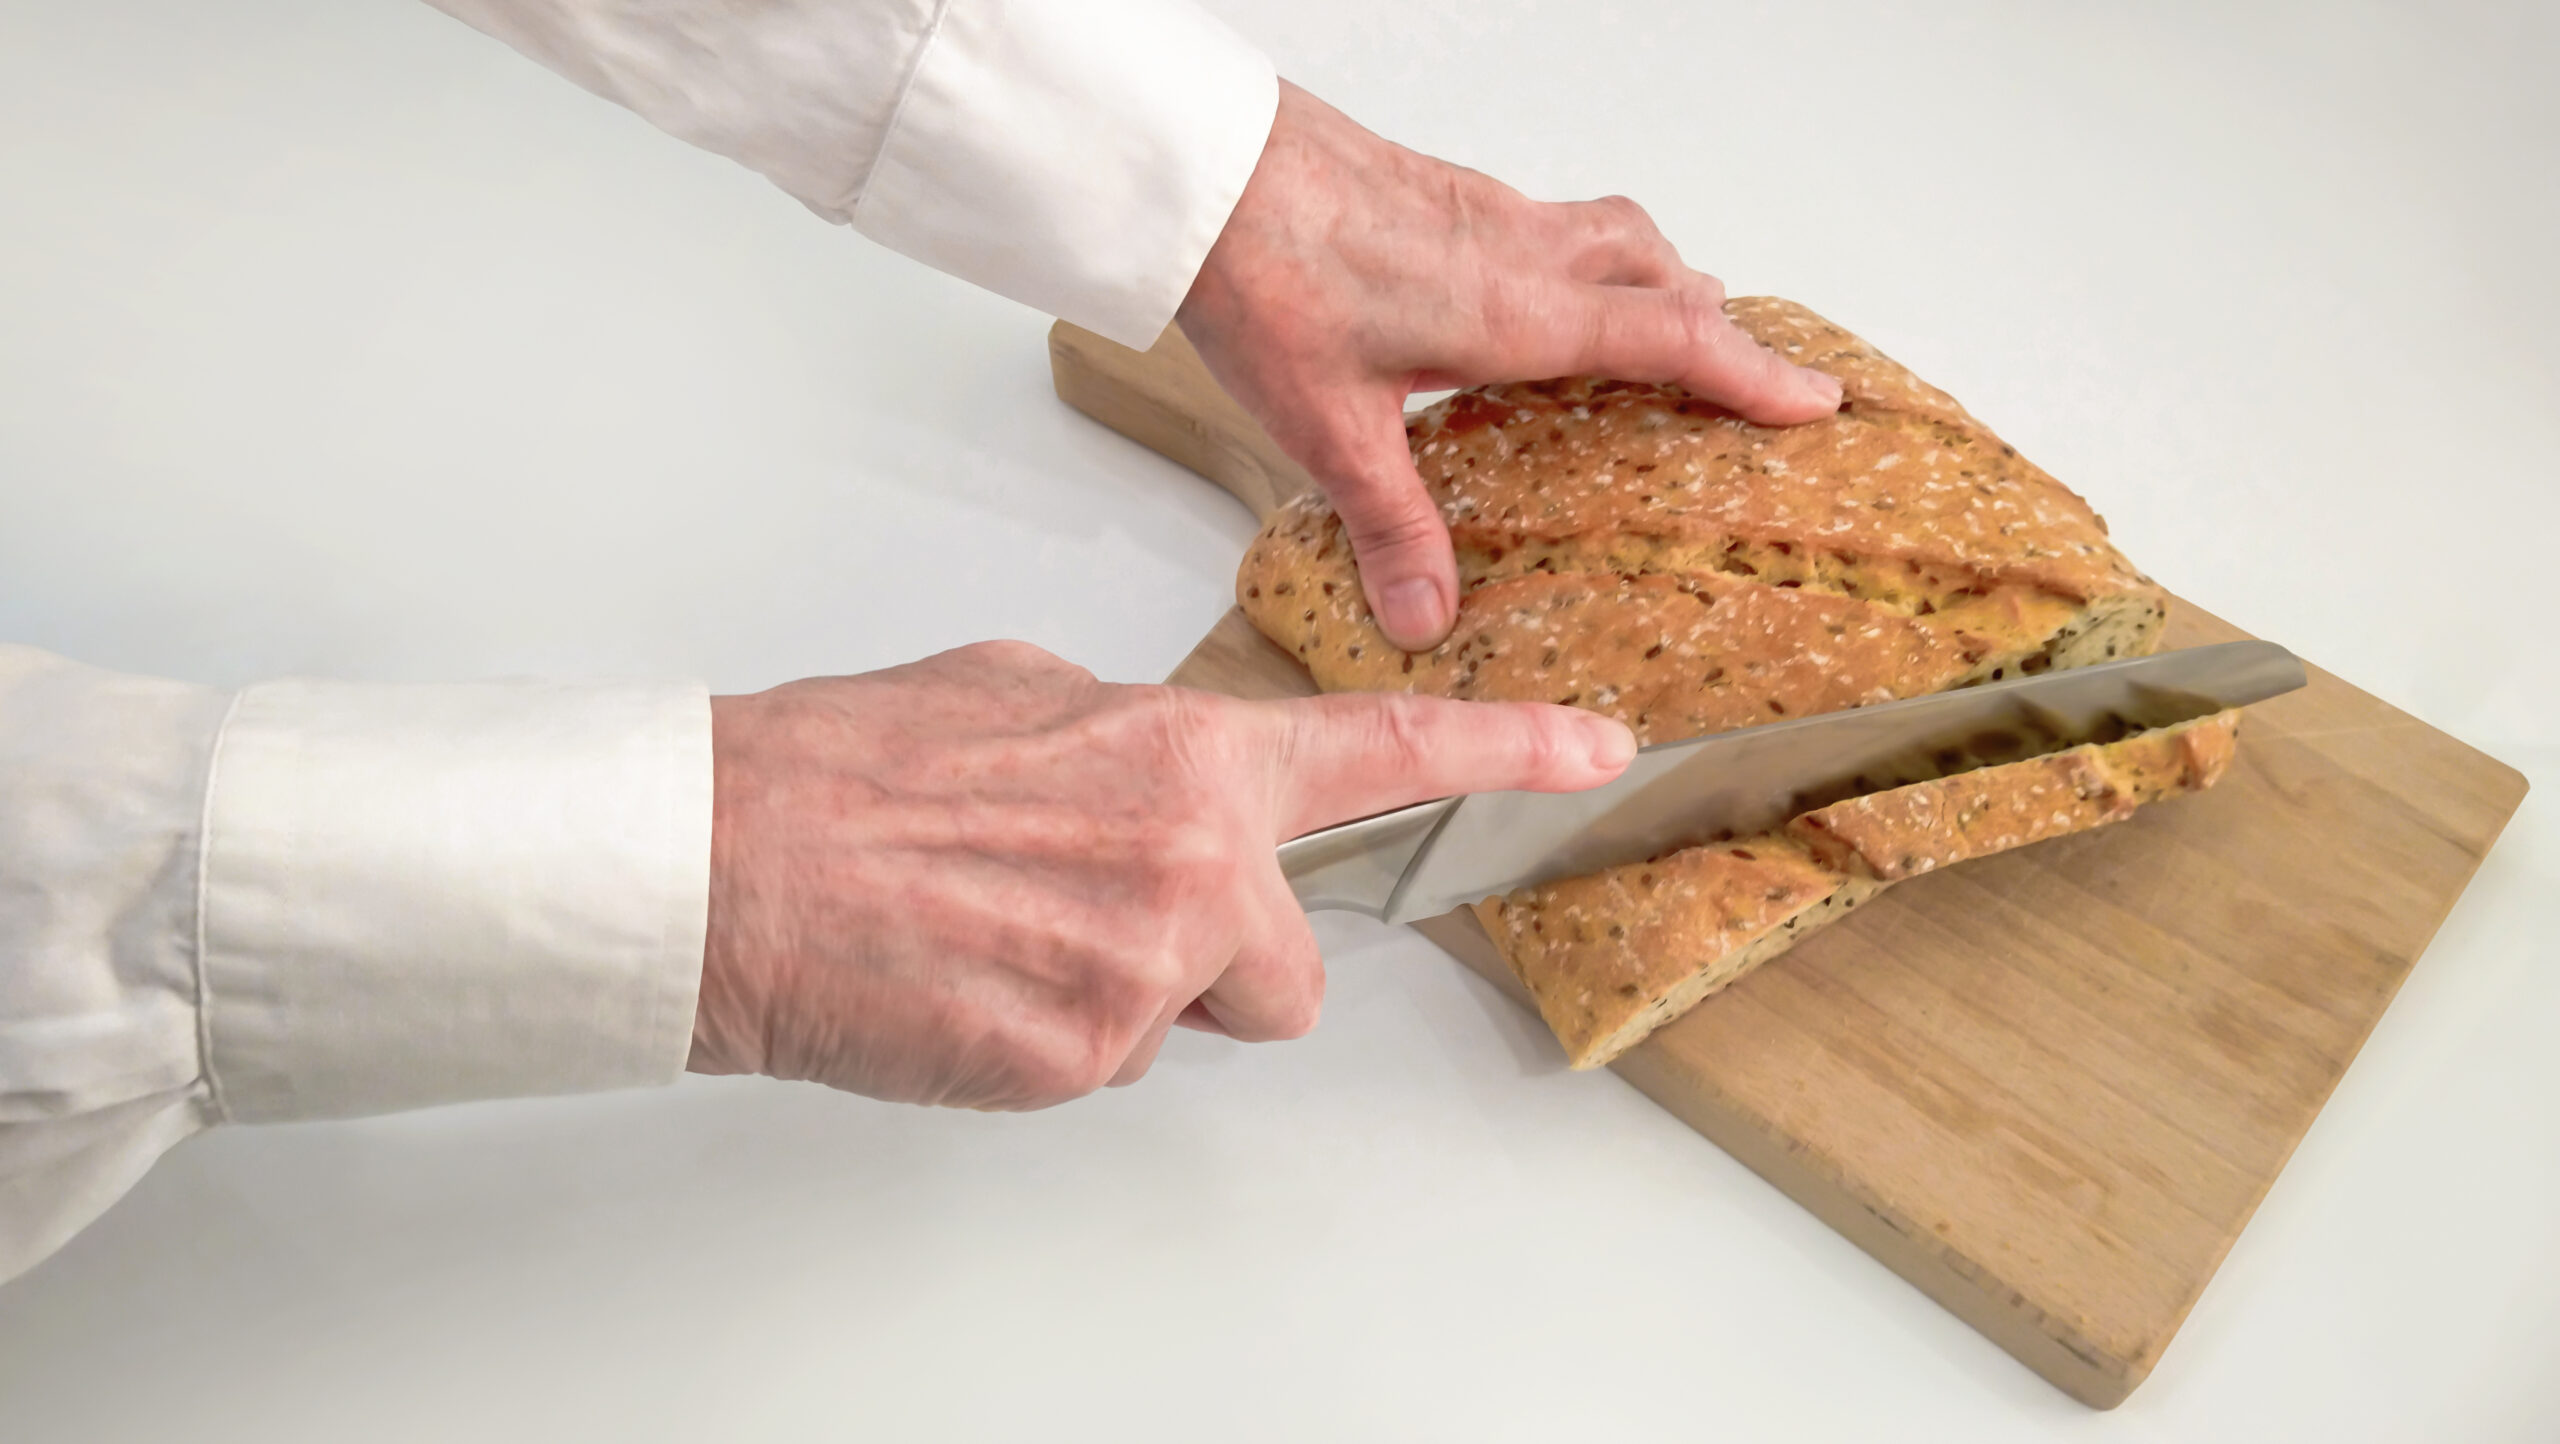 Senior female hands cutting integral whole grain bread loaf with large stainless steel bread knife, on wooden chopping board, set on neutral white background, high resolution stock photo.